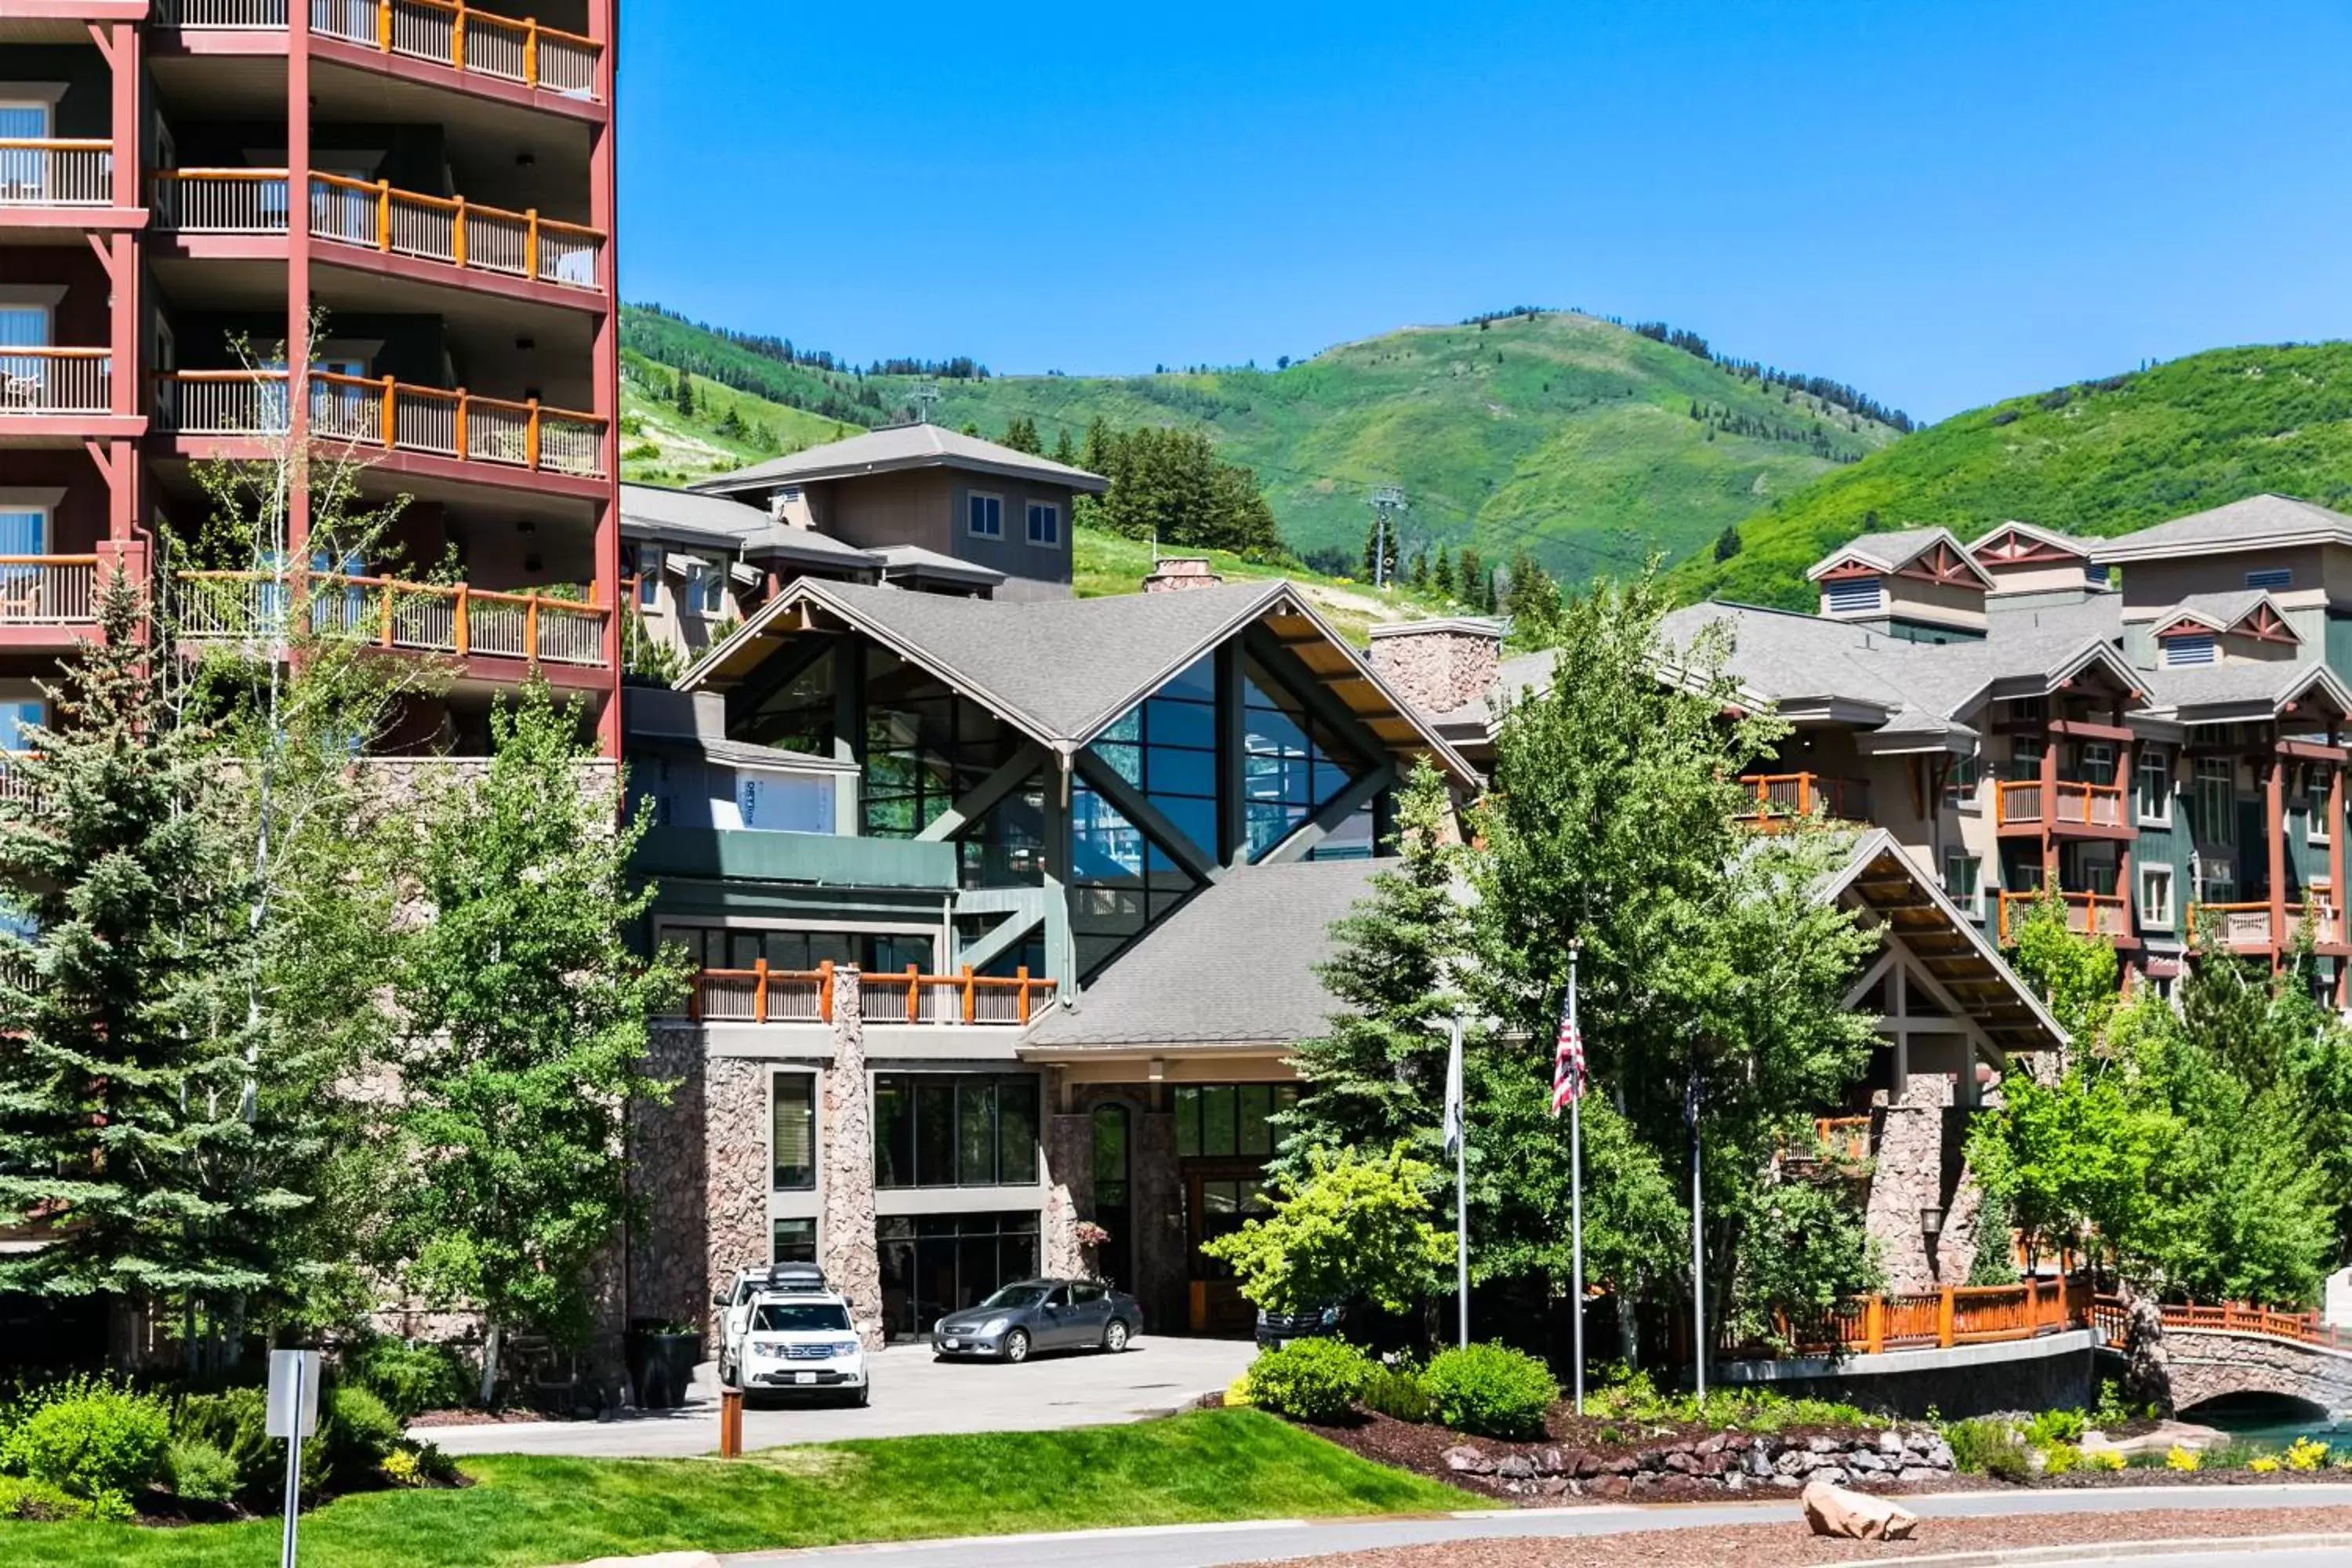 Property Building in Condos at Canyons Resort by White Pines